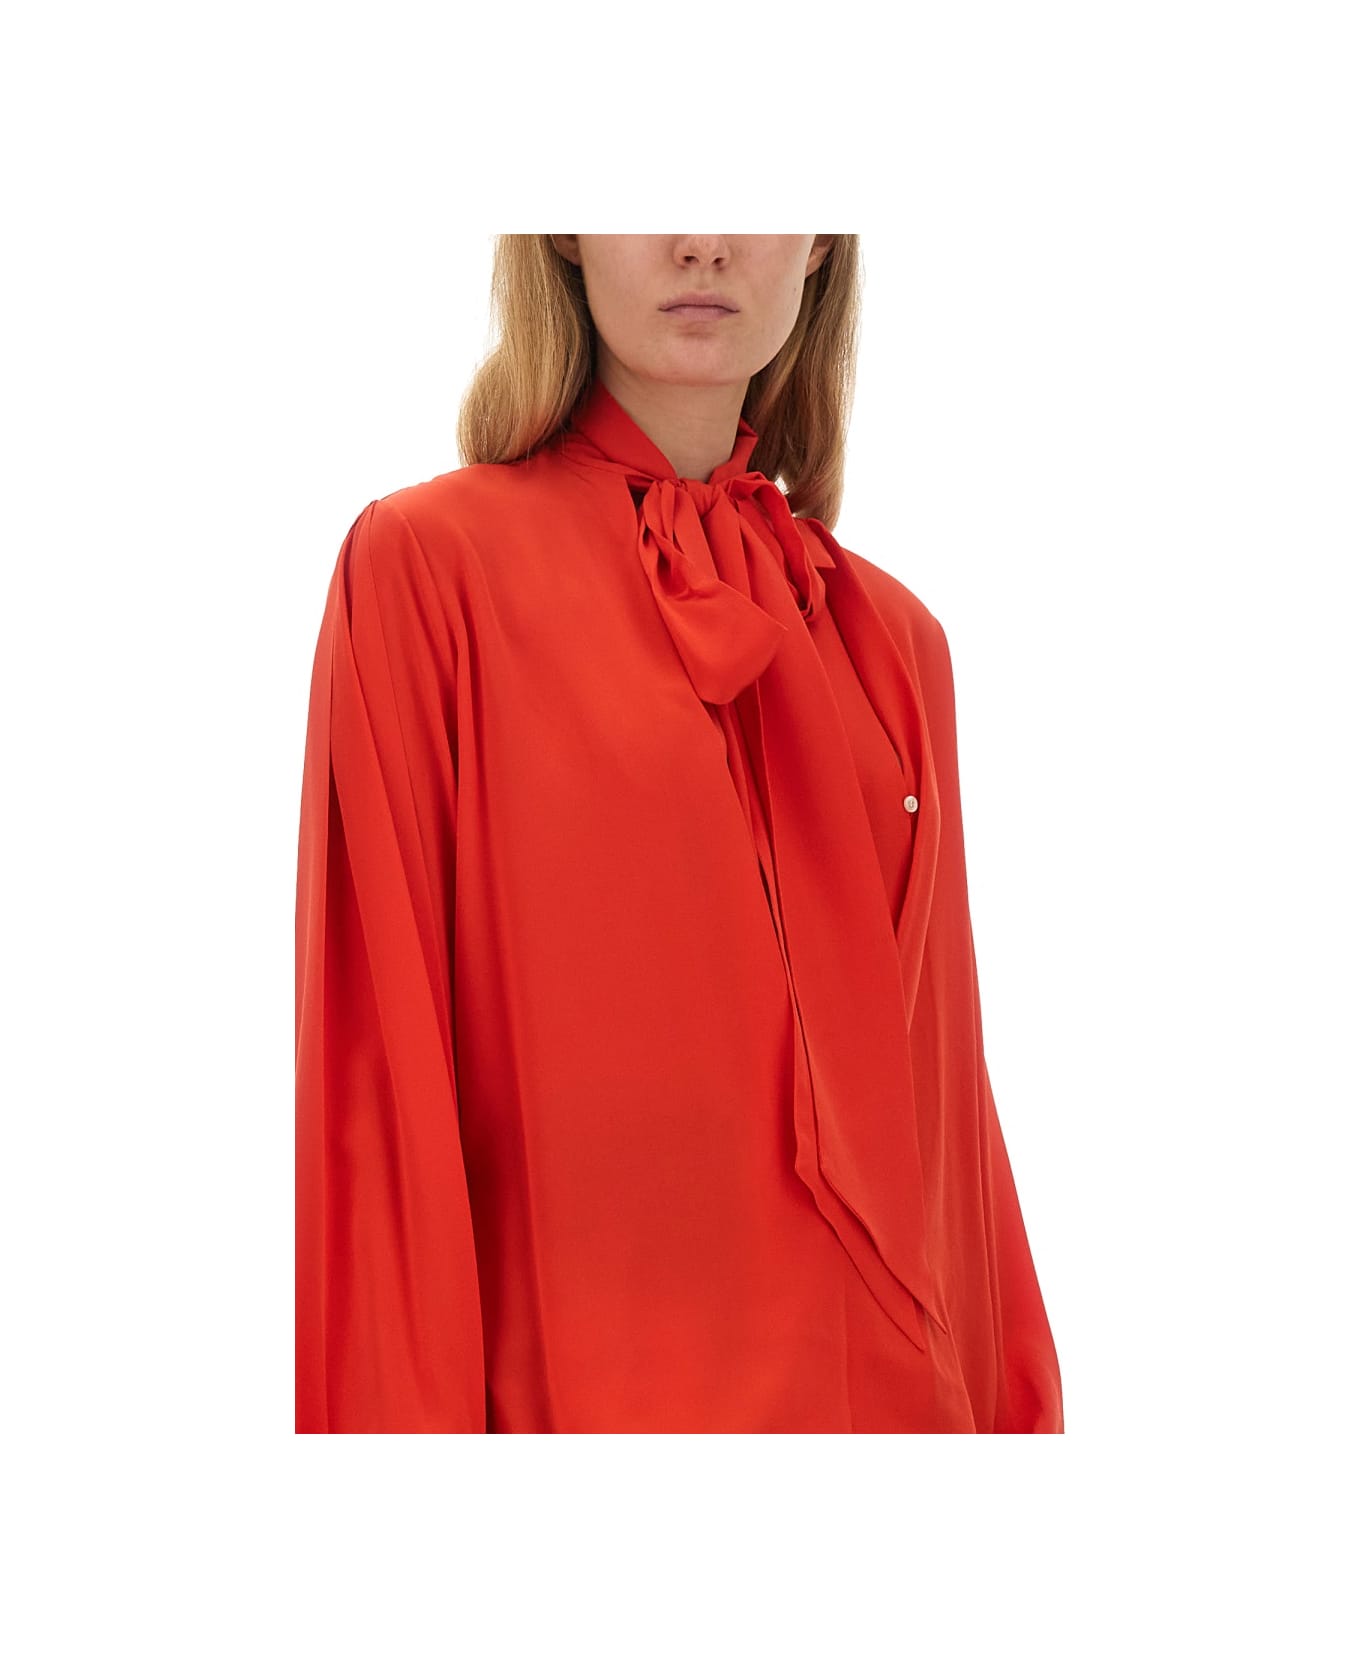 Victoria Beckham Blouse With Bow - RED